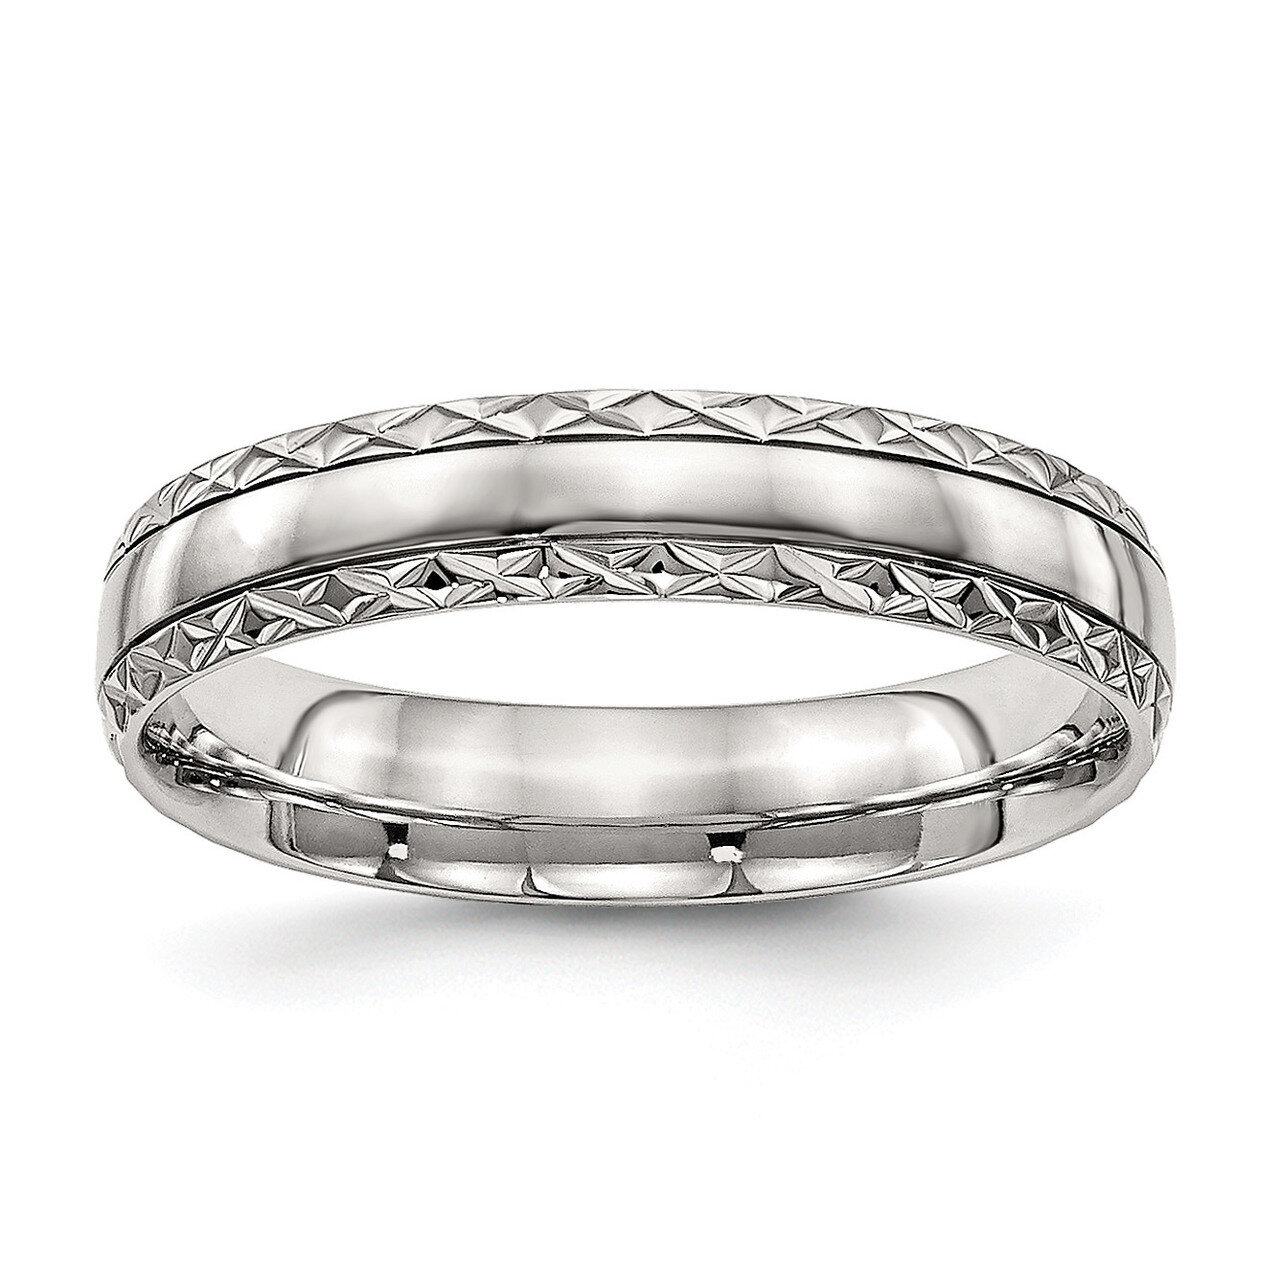 Grooved Criss Cross Design Ring Stainless Steel Polished SR487